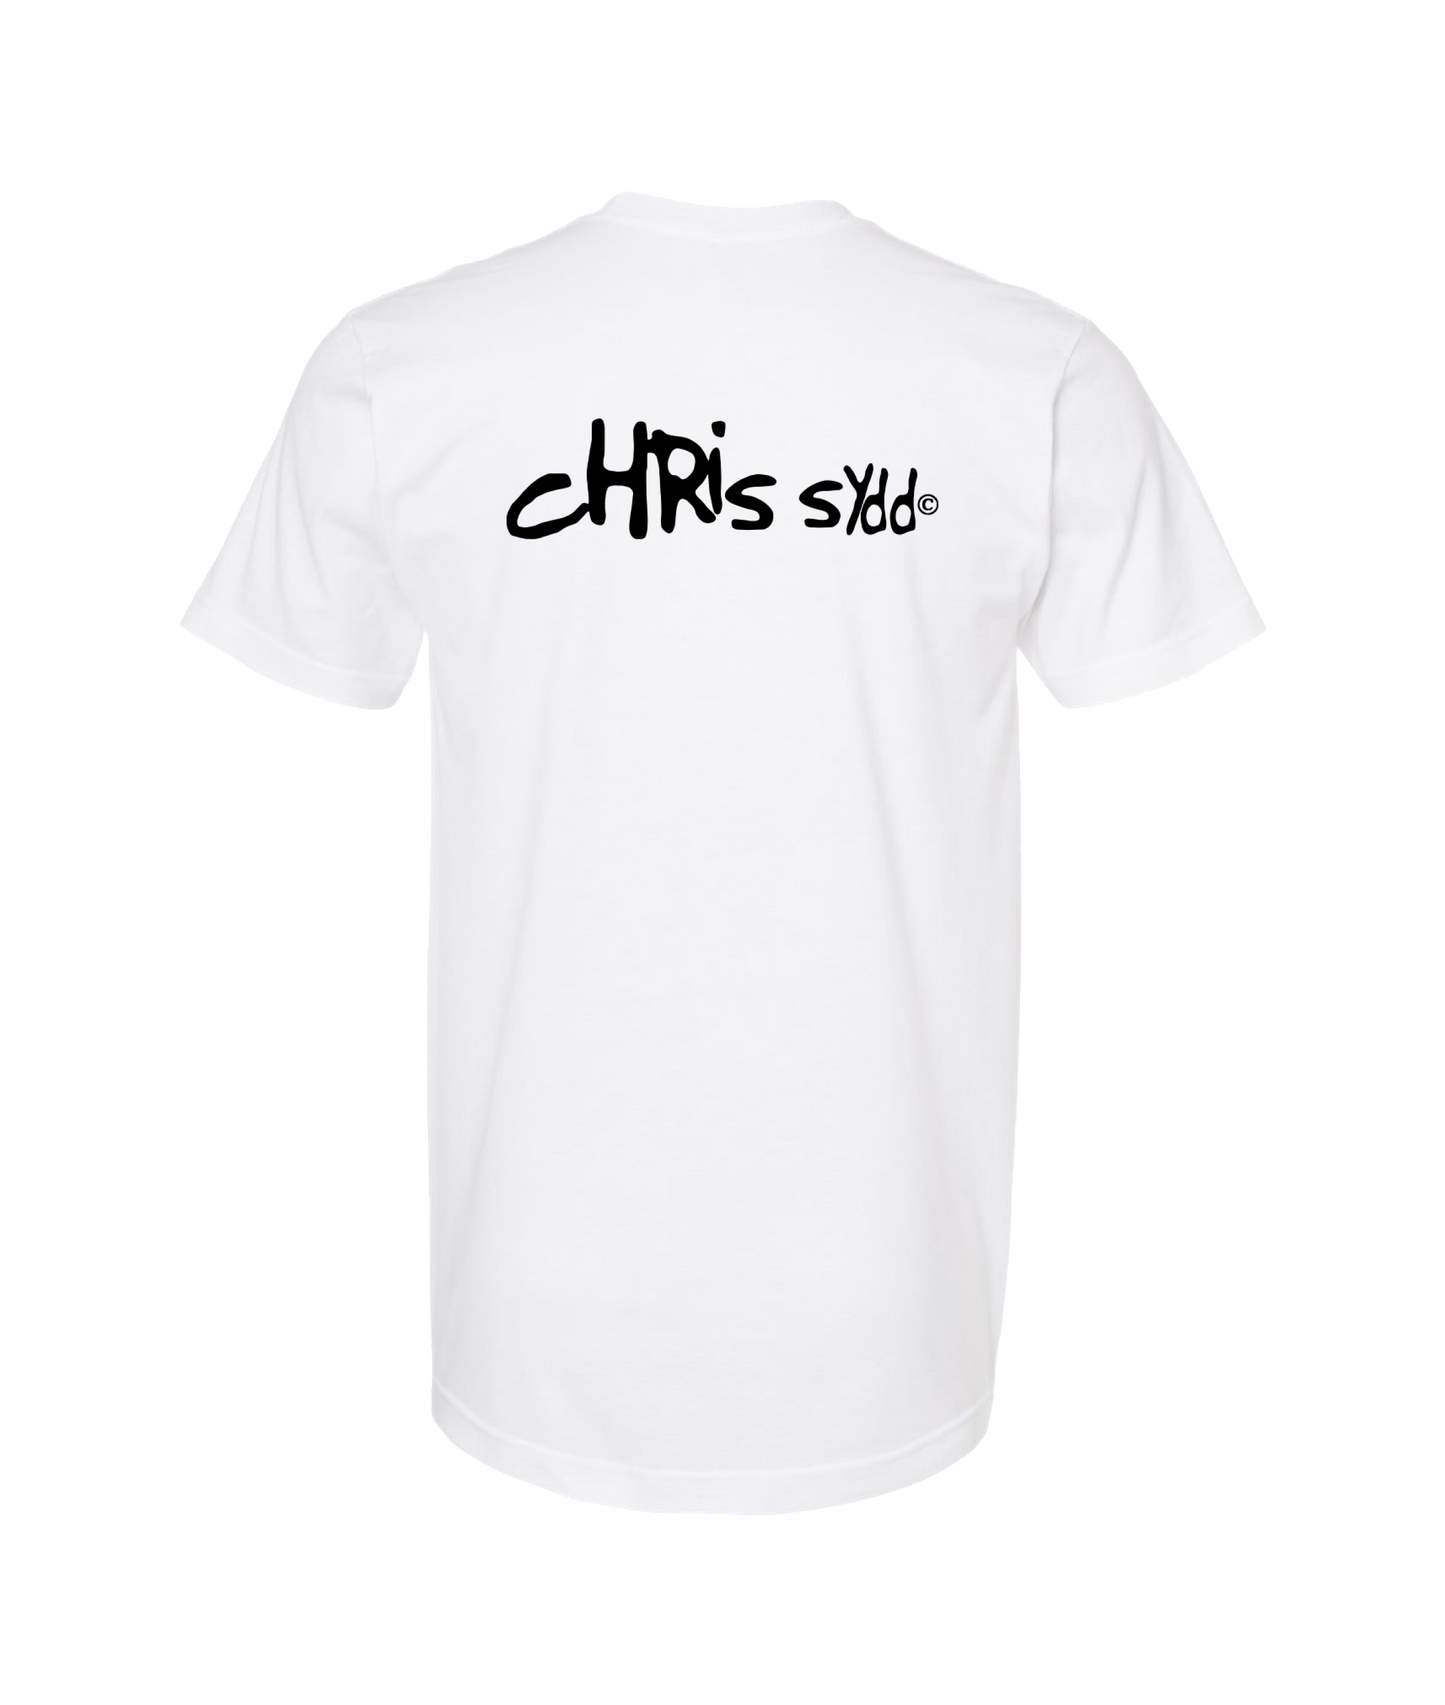 CHRIS SYDD - It Looks Just As Stupid When You Do It. - White T Shirt